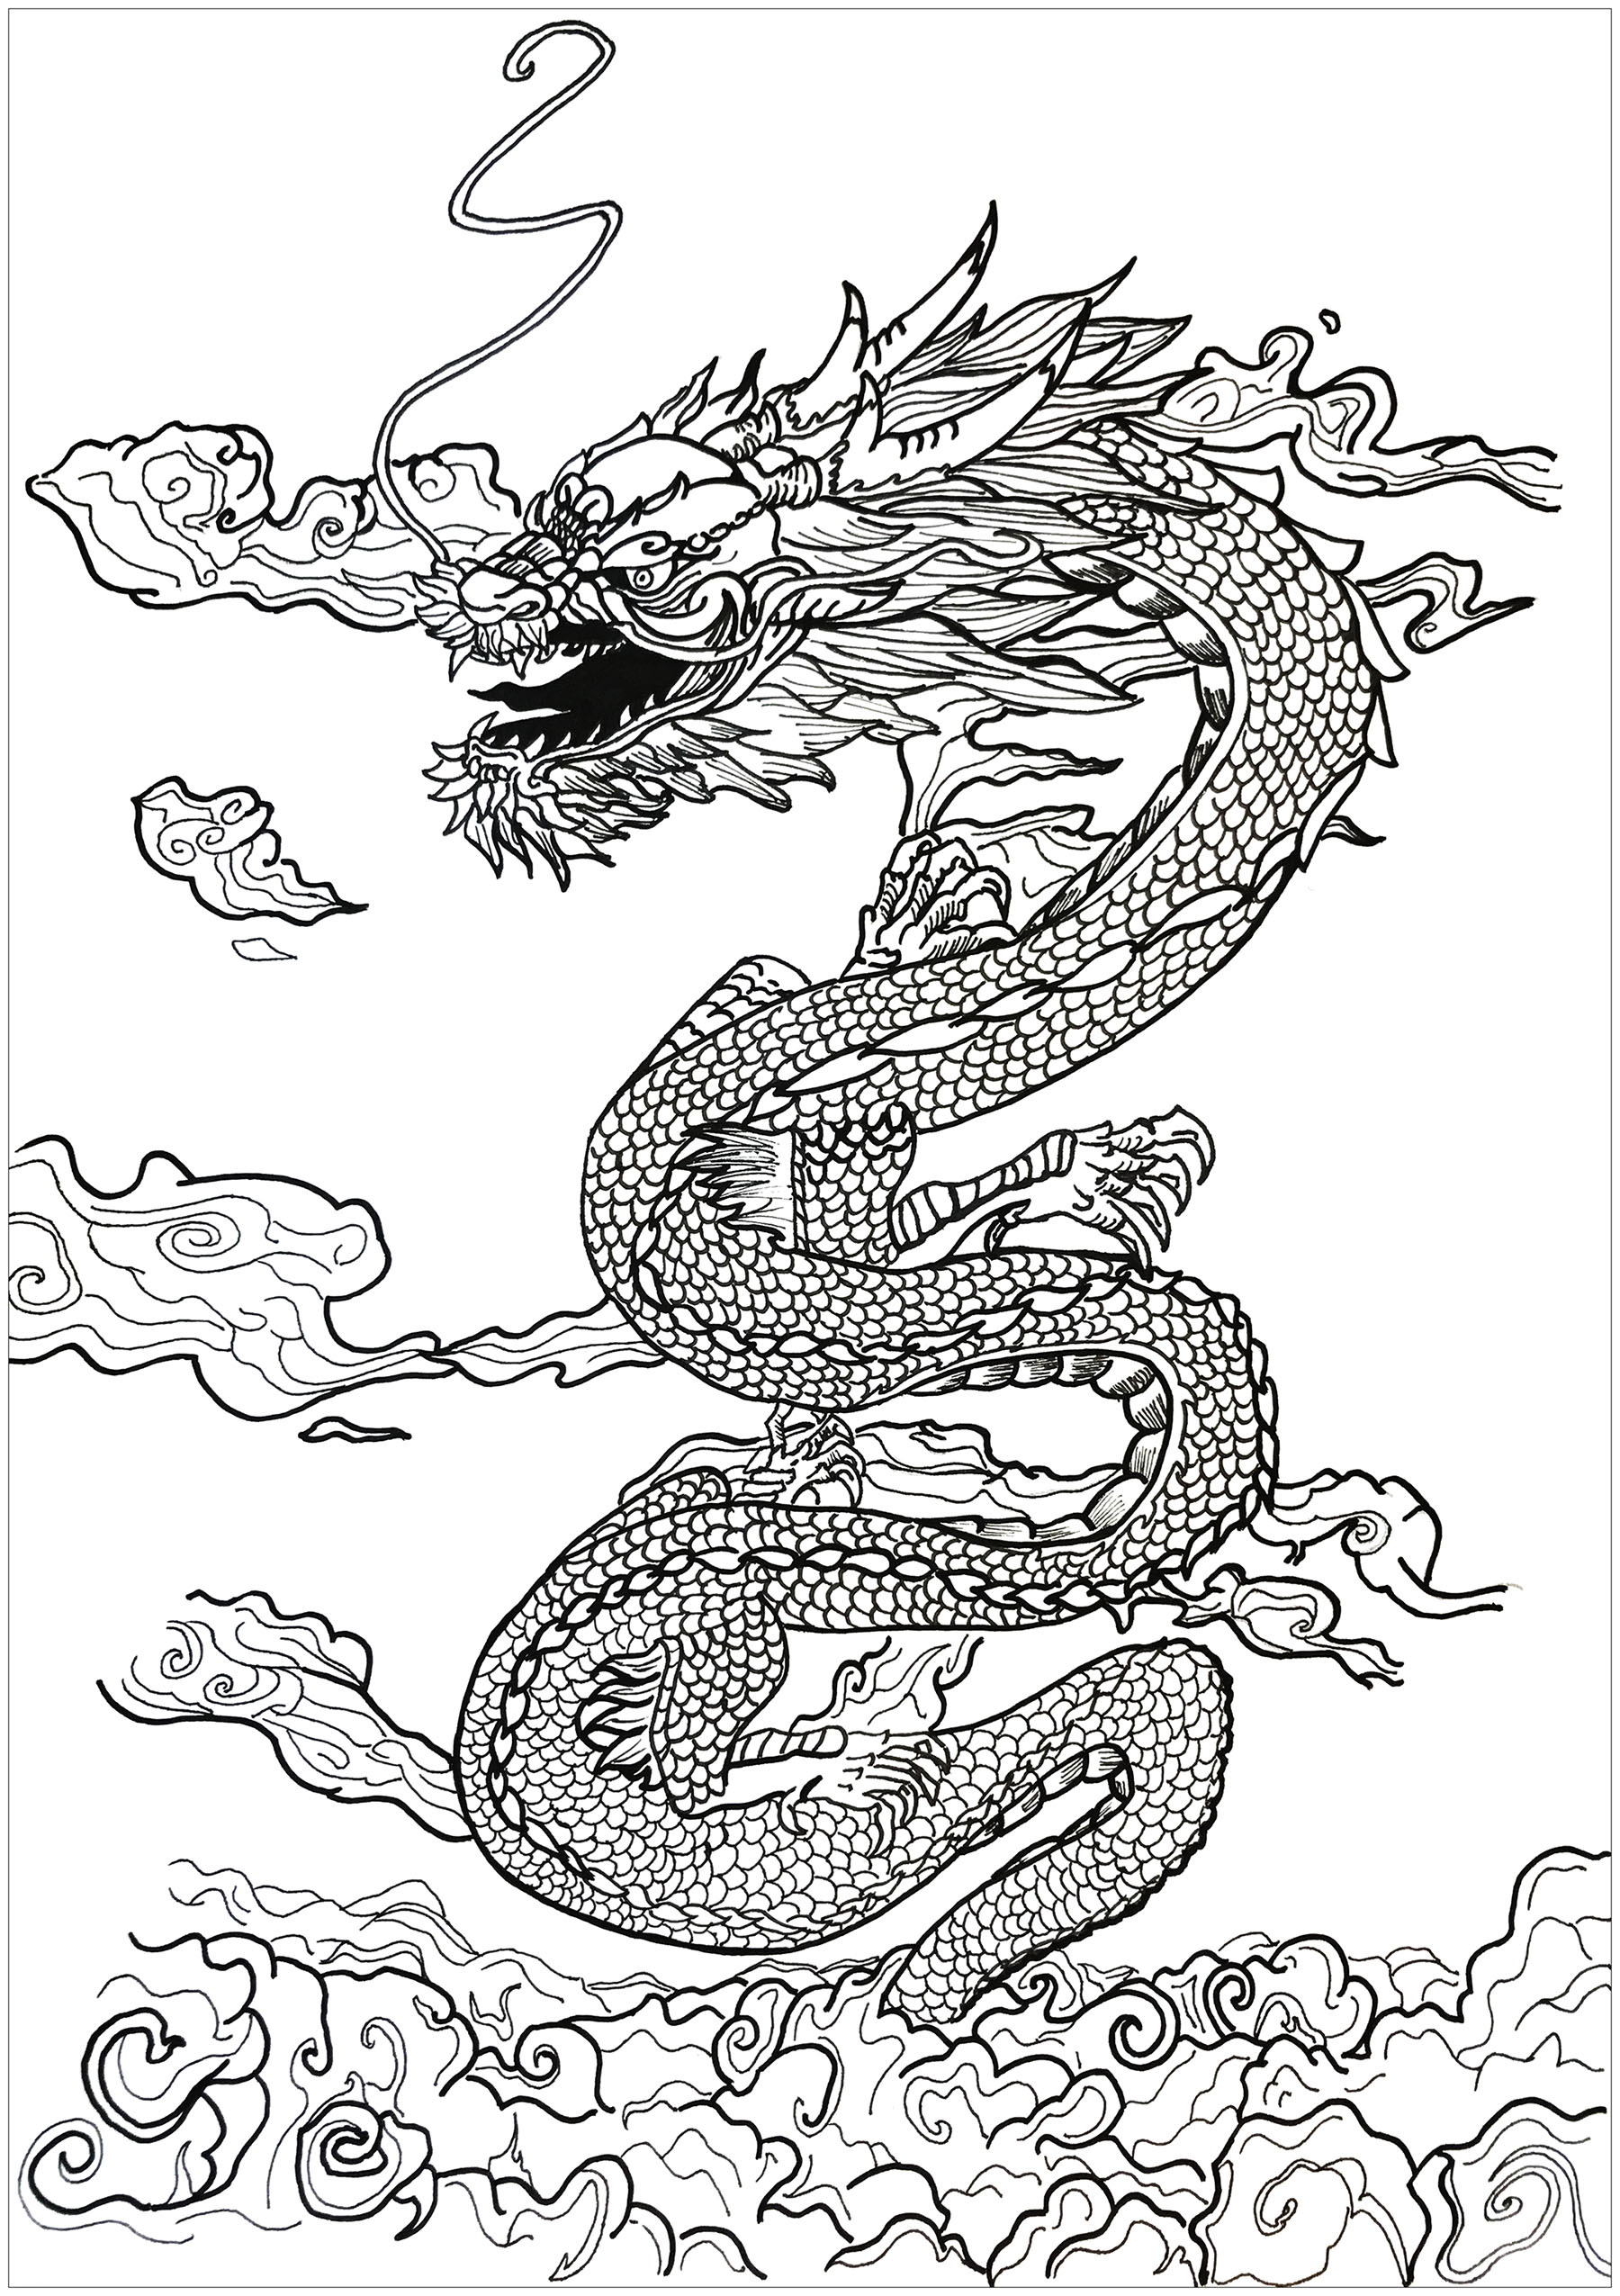 Dragon asian inspiration - Dragons Adult Coloring Pages